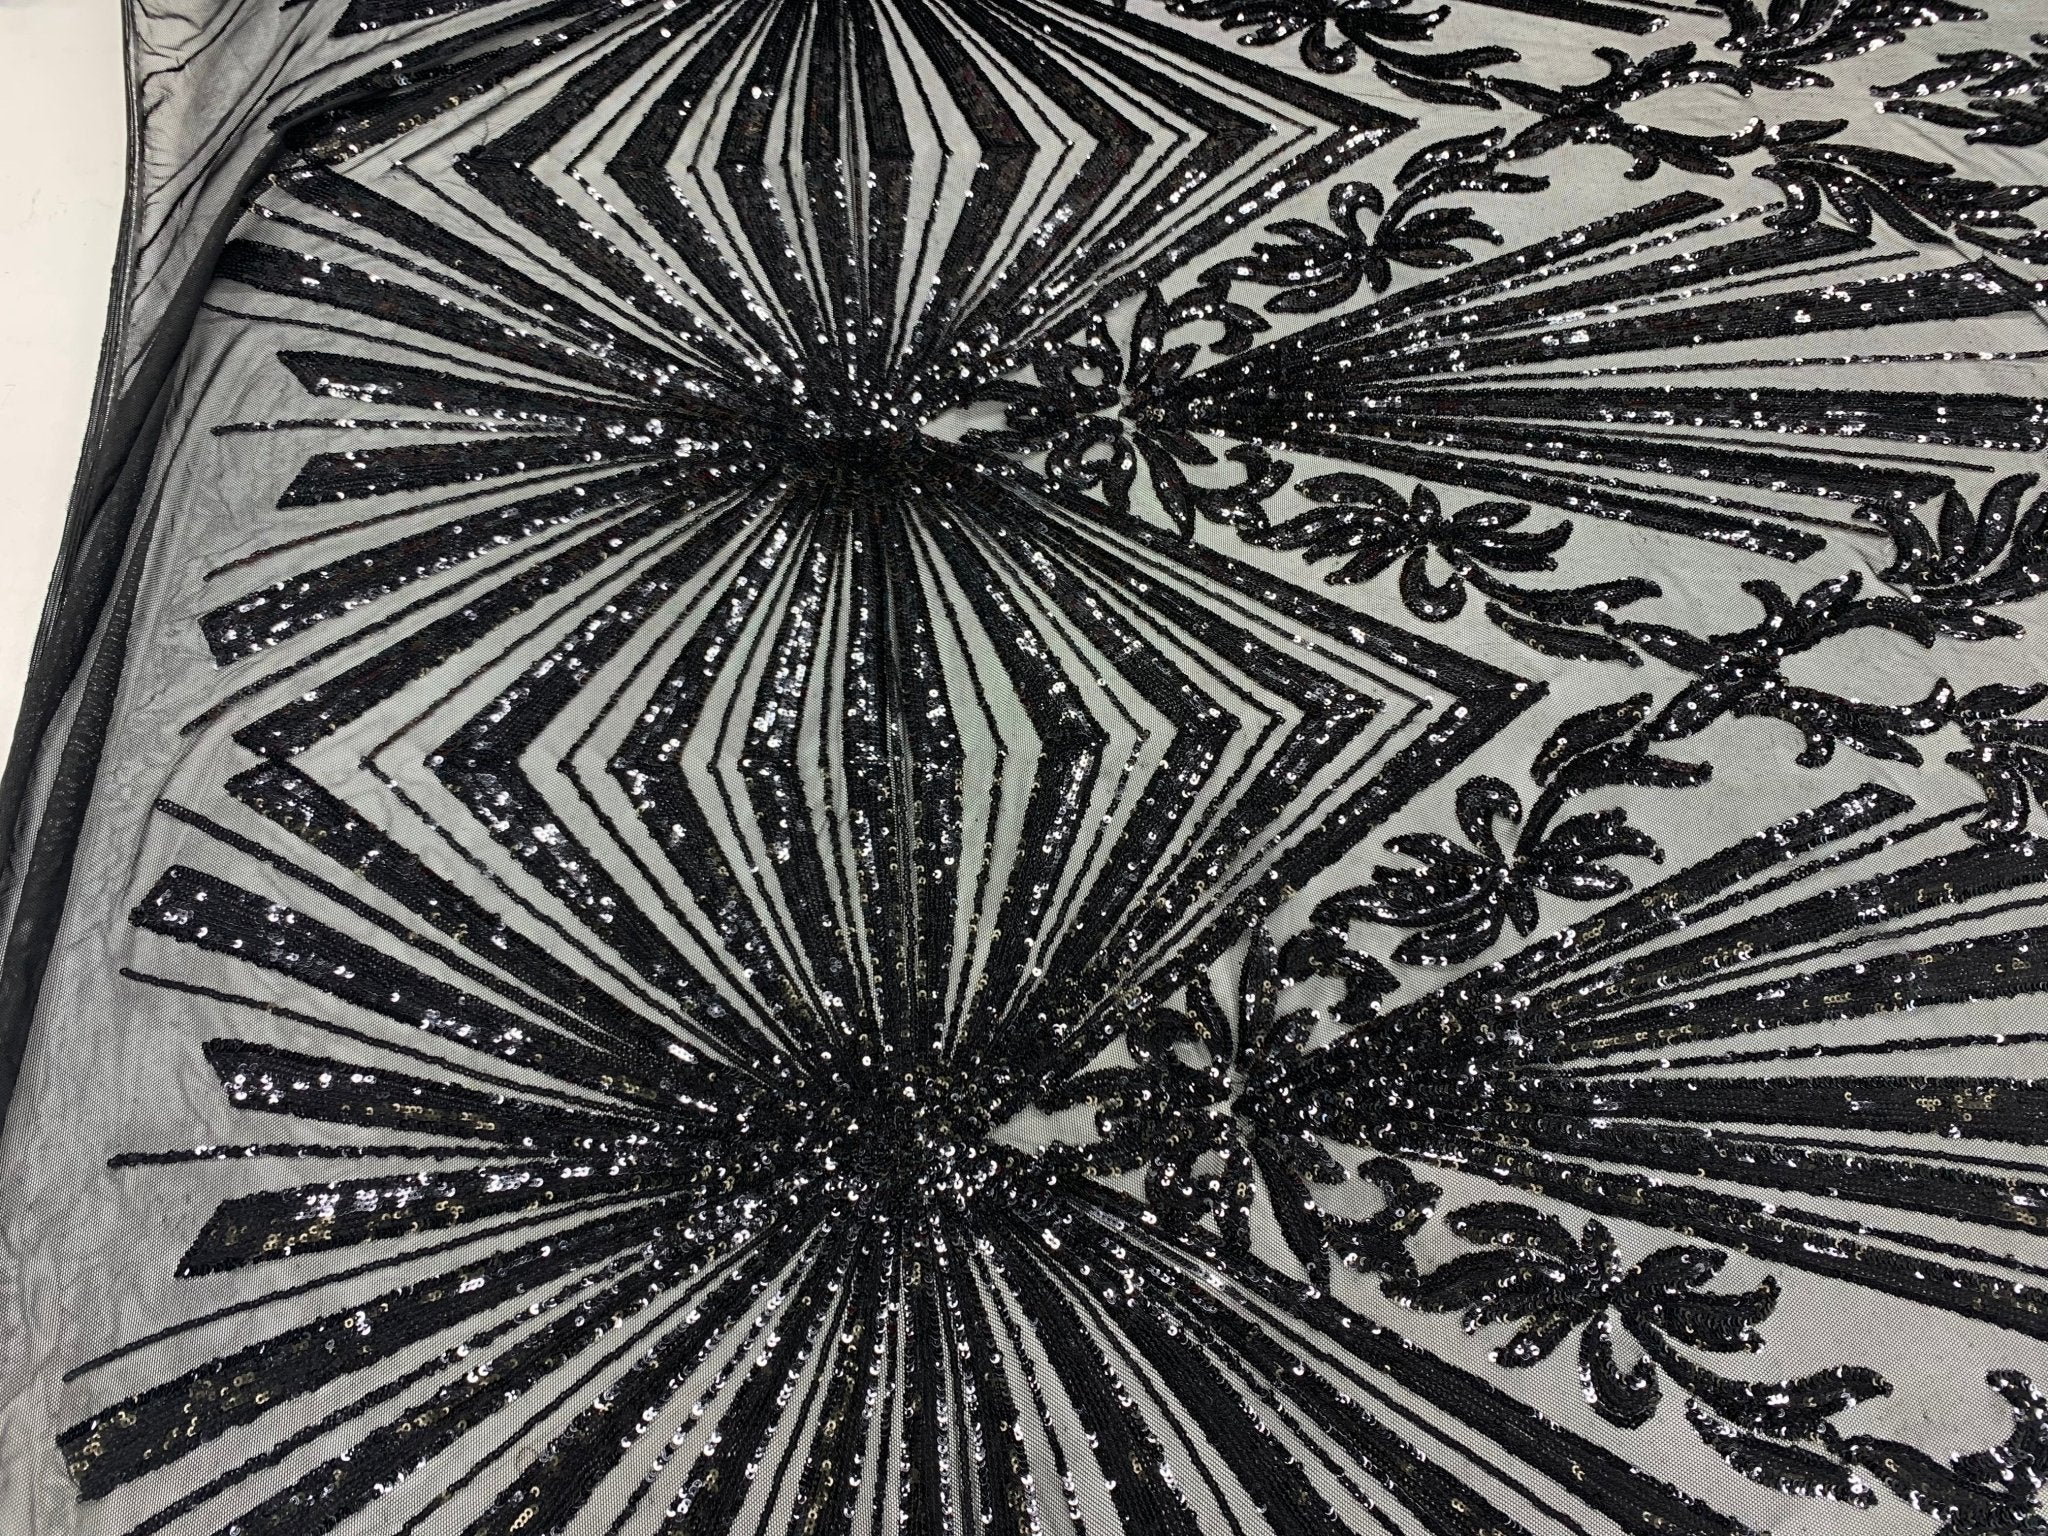 French Embroidery Stretch Sequins Fabric By The Yard on a Mesh LaceICEFABRICICE FABRICSBlack on Black MeshFrench Embroidery Stretch Sequins Fabric By The Yard on a Mesh Lace ICEFABRIC Black on Black Mesh